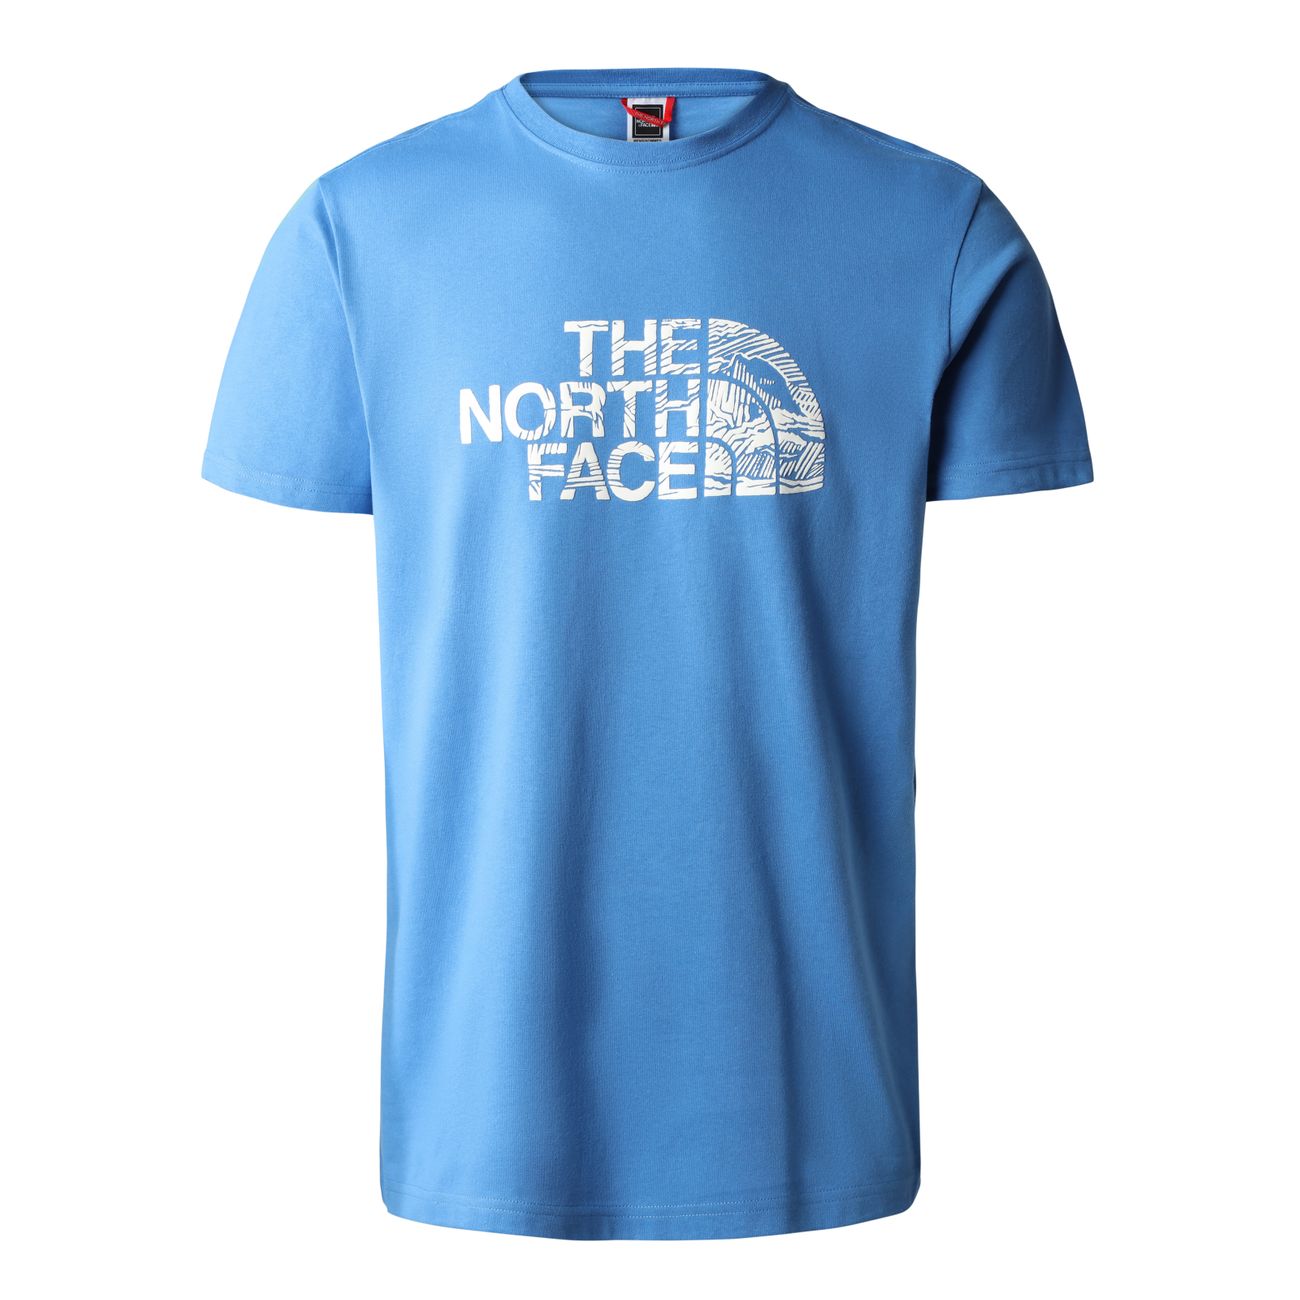 THE NORTH FACE M S/S WOODCUT DOME TEE Herren T-Shirt